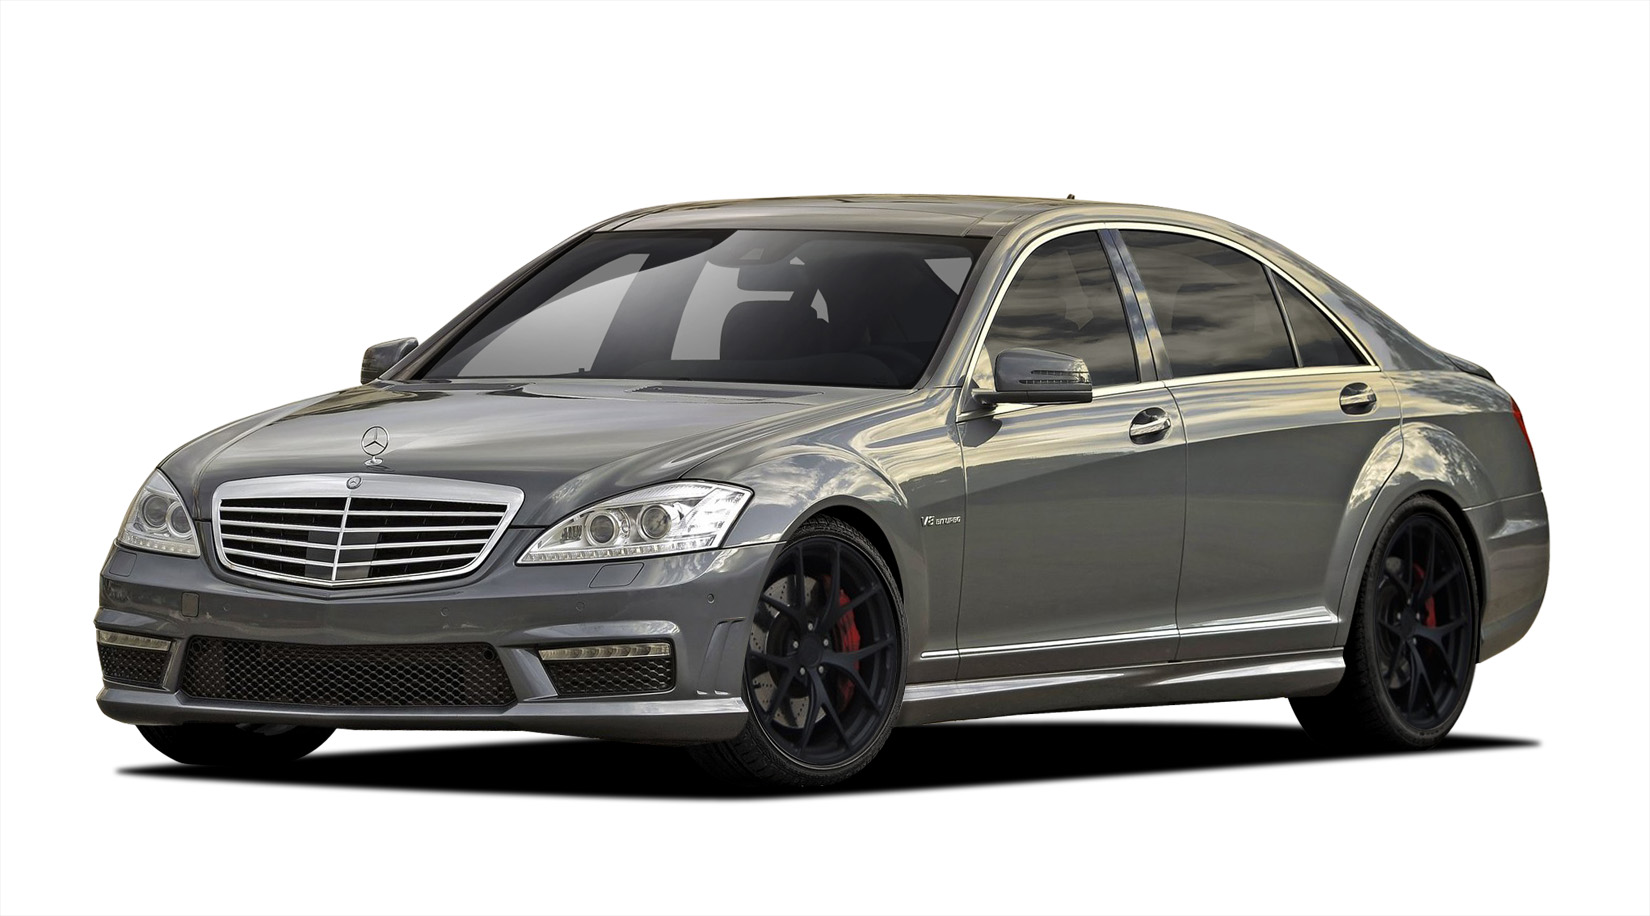 Polypropylene Body Kit Bodykit for 2011 Mercedes S Class ALL - Mercedes S Class W221 Vaero S63 Look Kit ( with PDC ) - 4 Piece - Includes S63 Look Fro